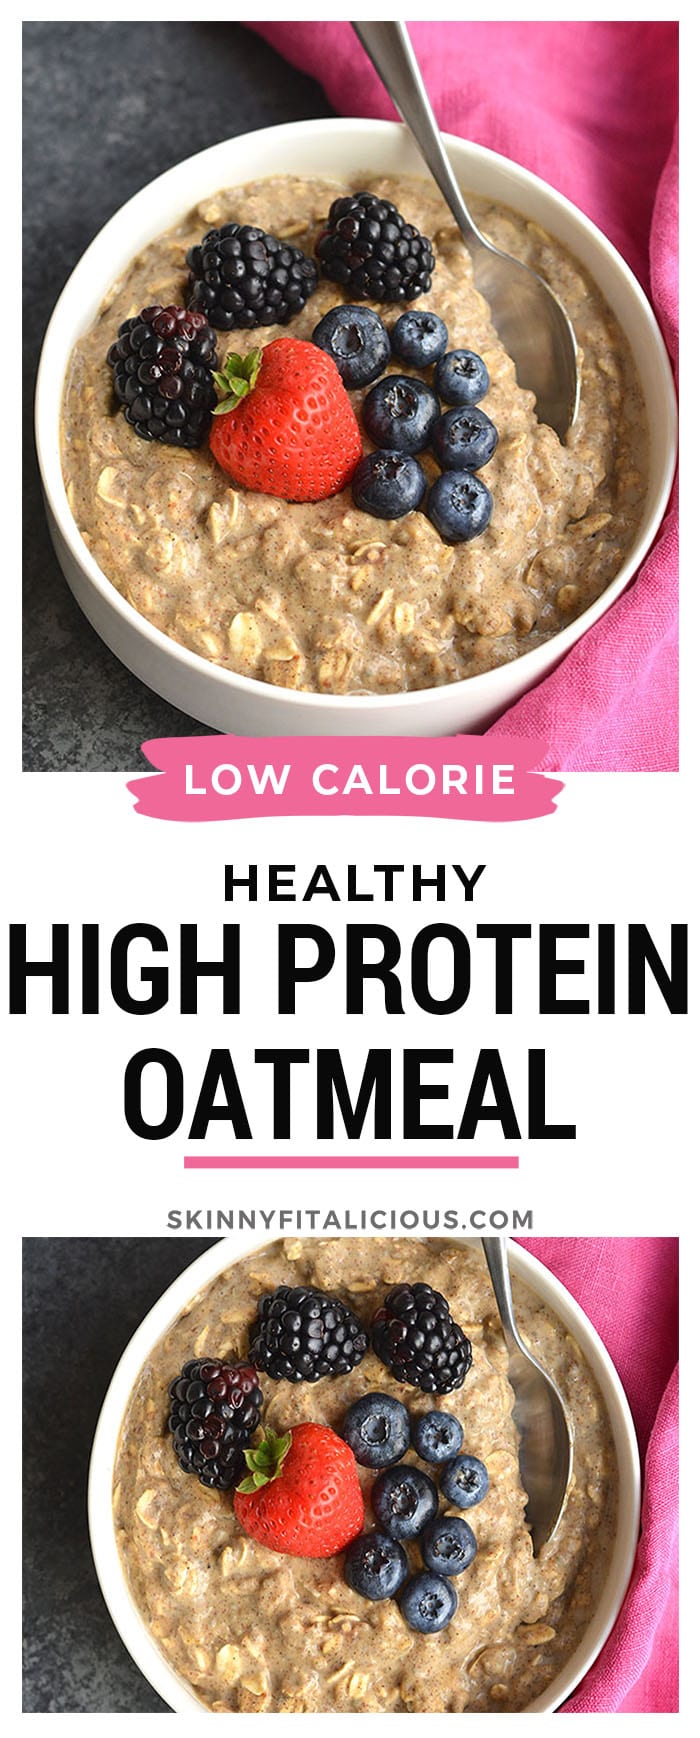 High Protein Oatmeal! Start your day with oatmeal made healthier with protein and omega-3's. Balanced oatmeal for balancing fat loss hormones and losing weight. Prep as instant oats or overnight oats.